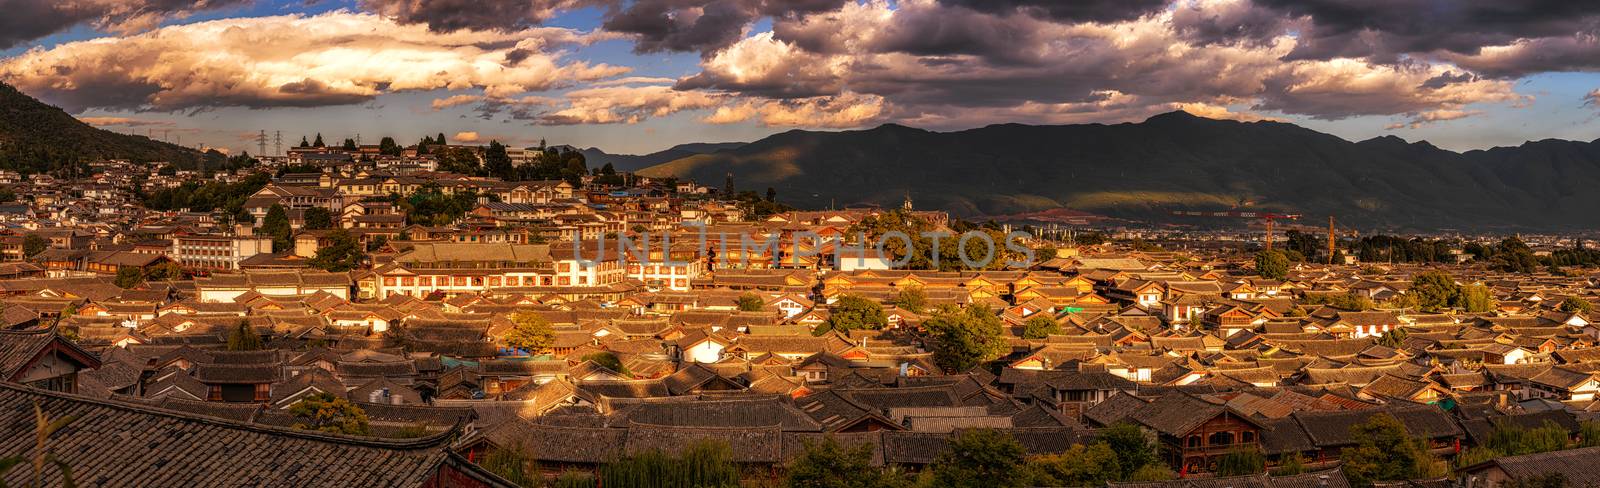 Panorama Top view scene of ancient LiJiang old town, is the hist by Tzido